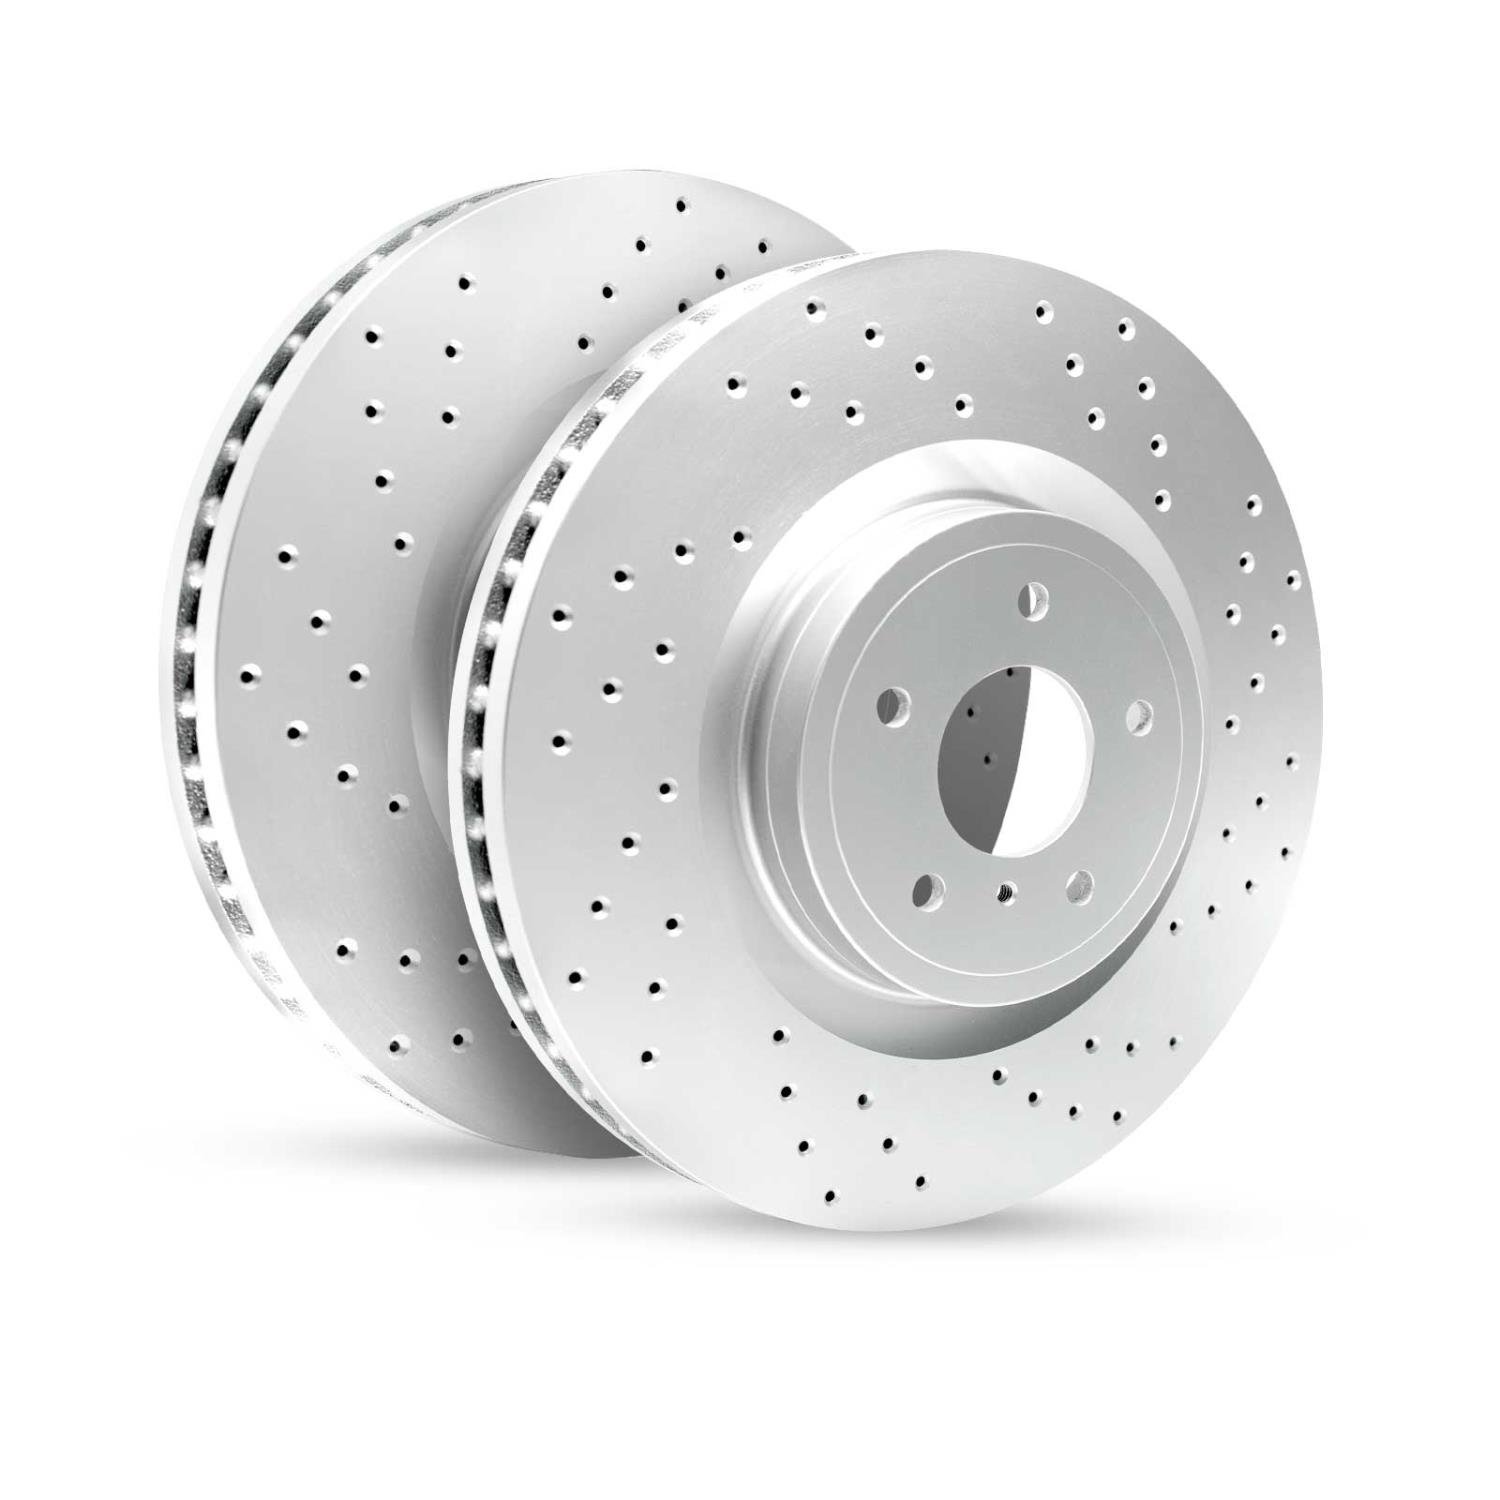 GEO-Carbon Drilled/Slotted Rotors, Fits Select Kia/Hyundai/Genesis, Position: Rear